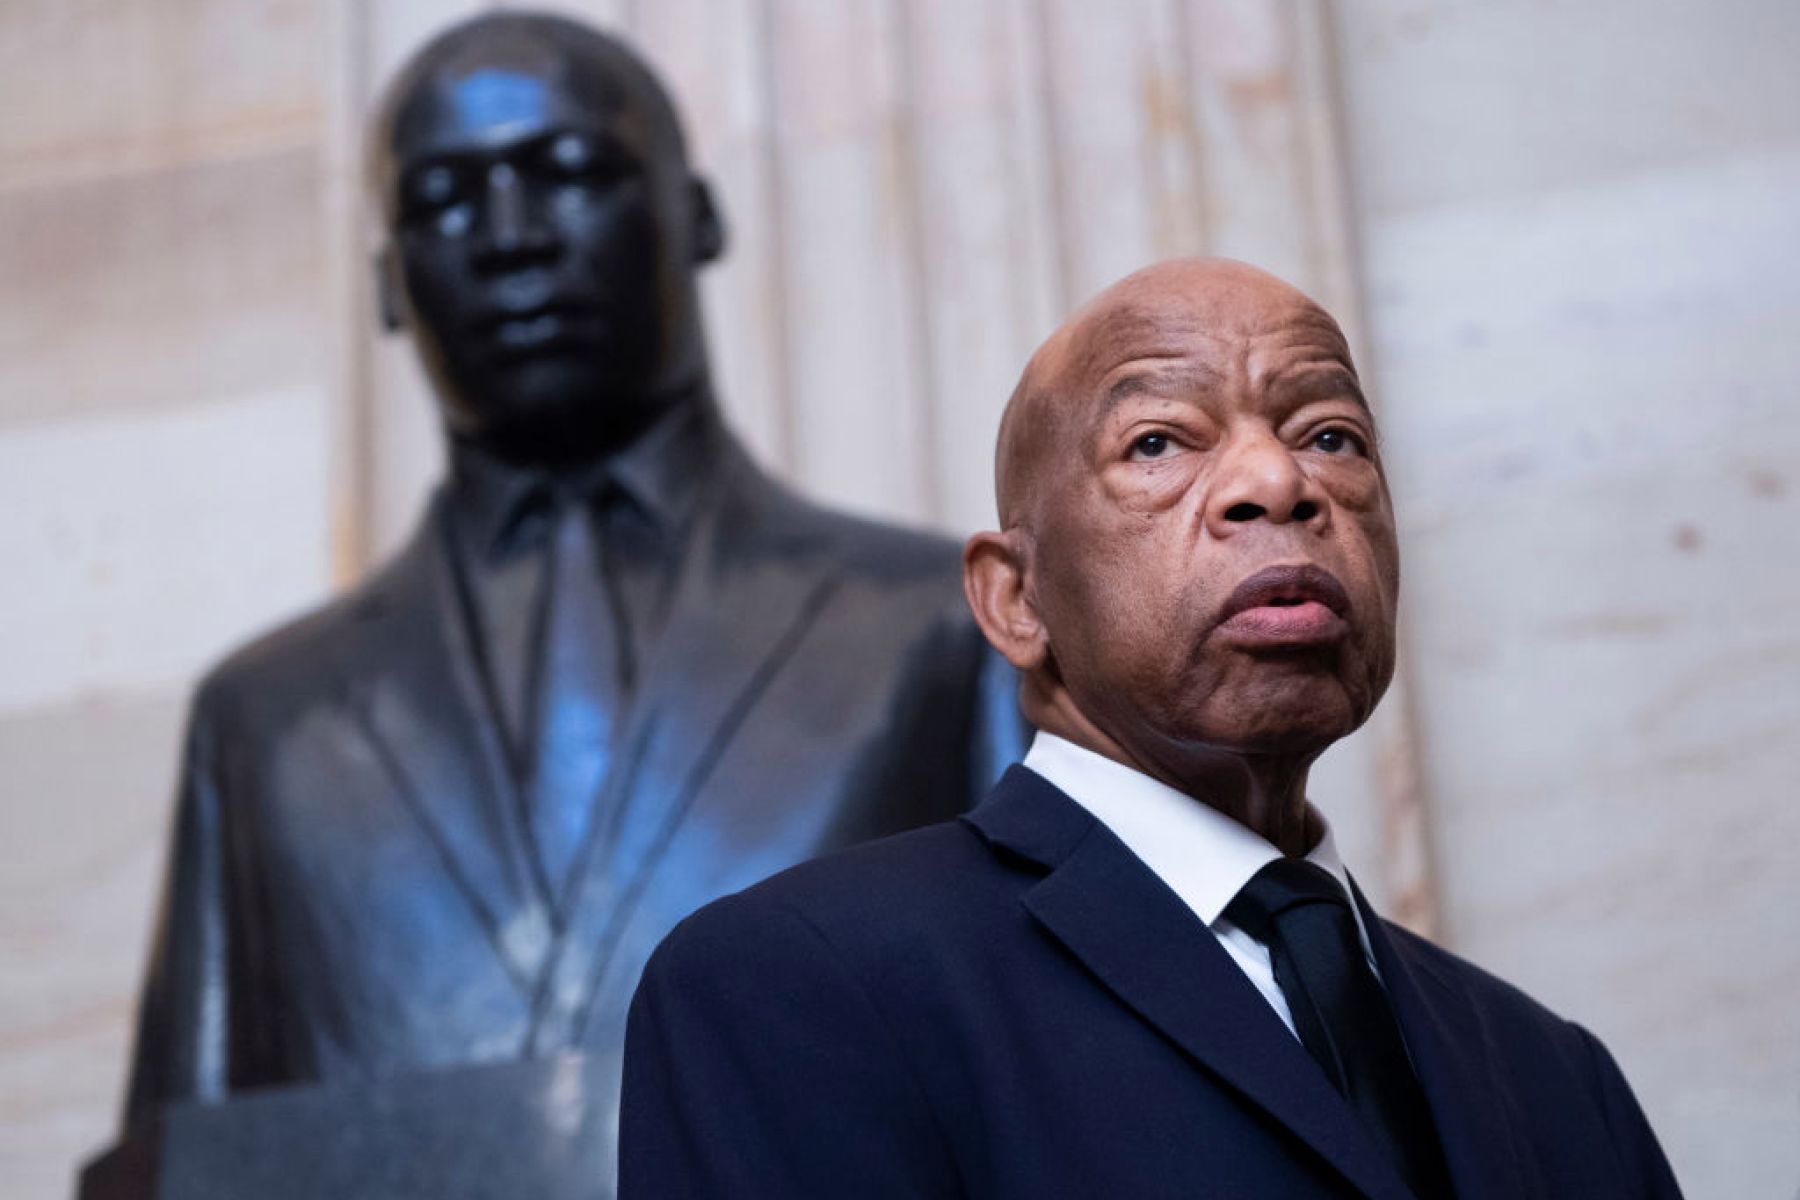 UNITED STATES - OCTOBER 24: Rep. John Lewis, D-Ga., is seen near the statue of Dr. Martin Luther King, Jr., in the Capitol Rotunda before a memorial service for the late Rep. Elijah Cummings, D-Md., in Statuary Hall on Thursday, October 24, 2019. (Photo By Tom Williams/CQ-Roll Call, Inc via Getty Images),